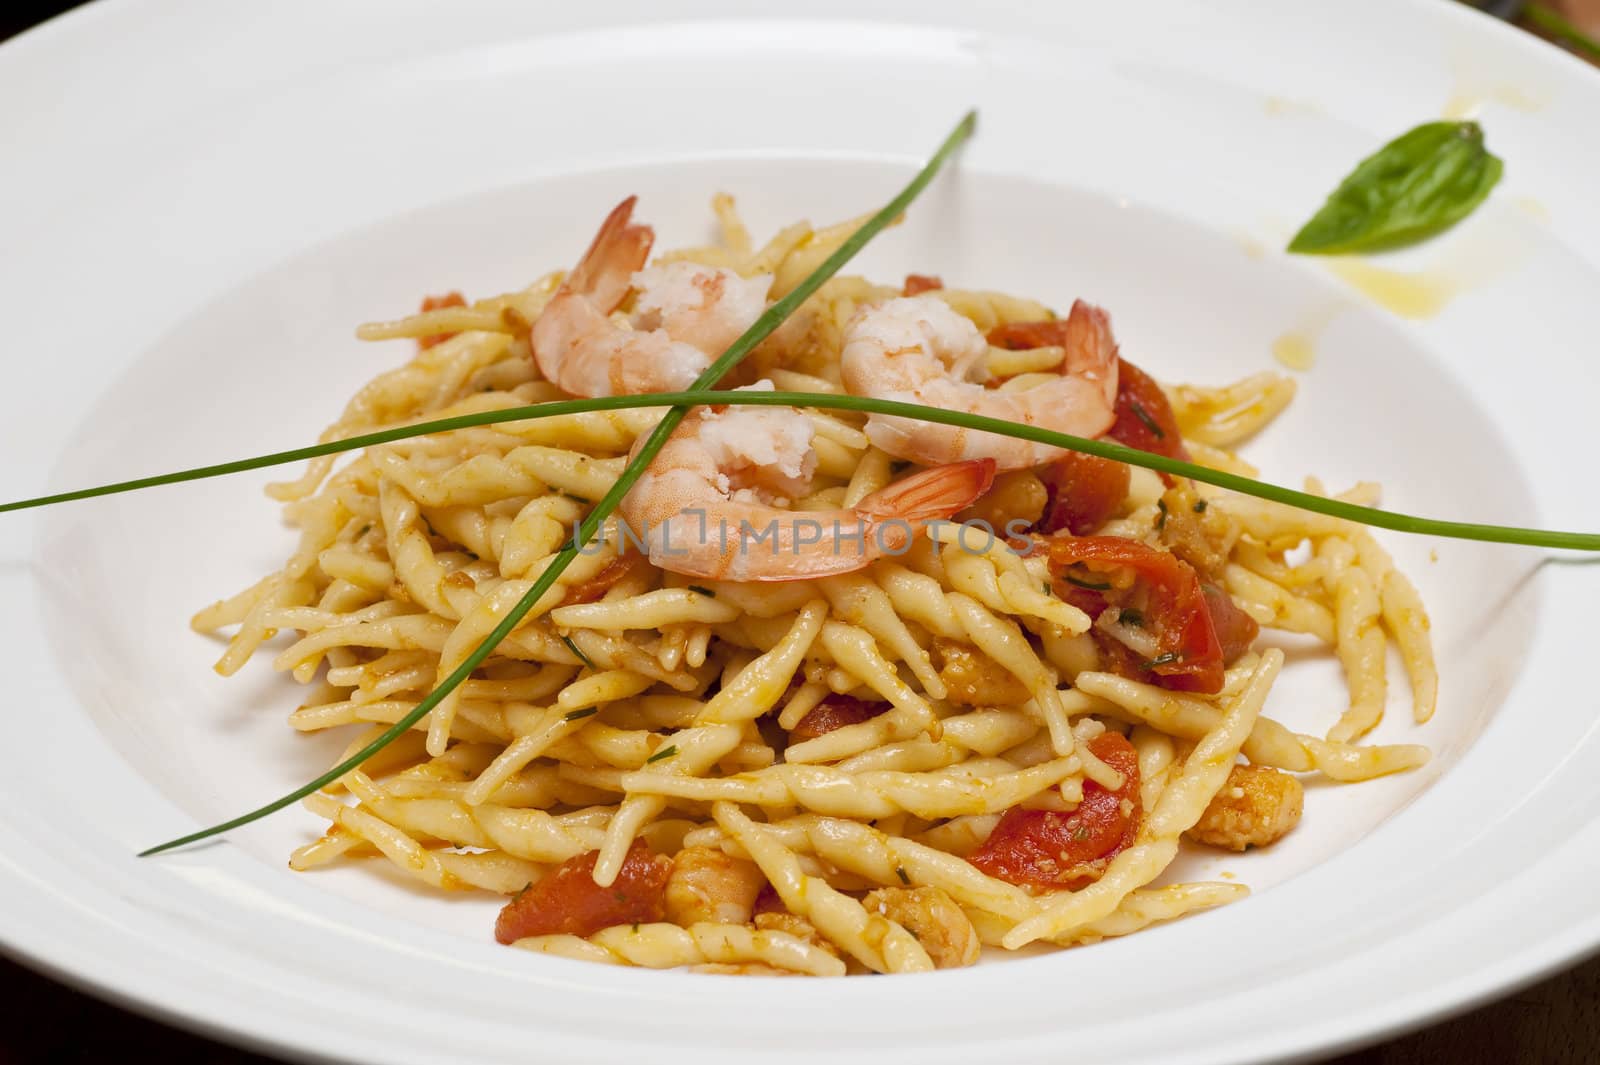 A first course dish with pasta and vegetables